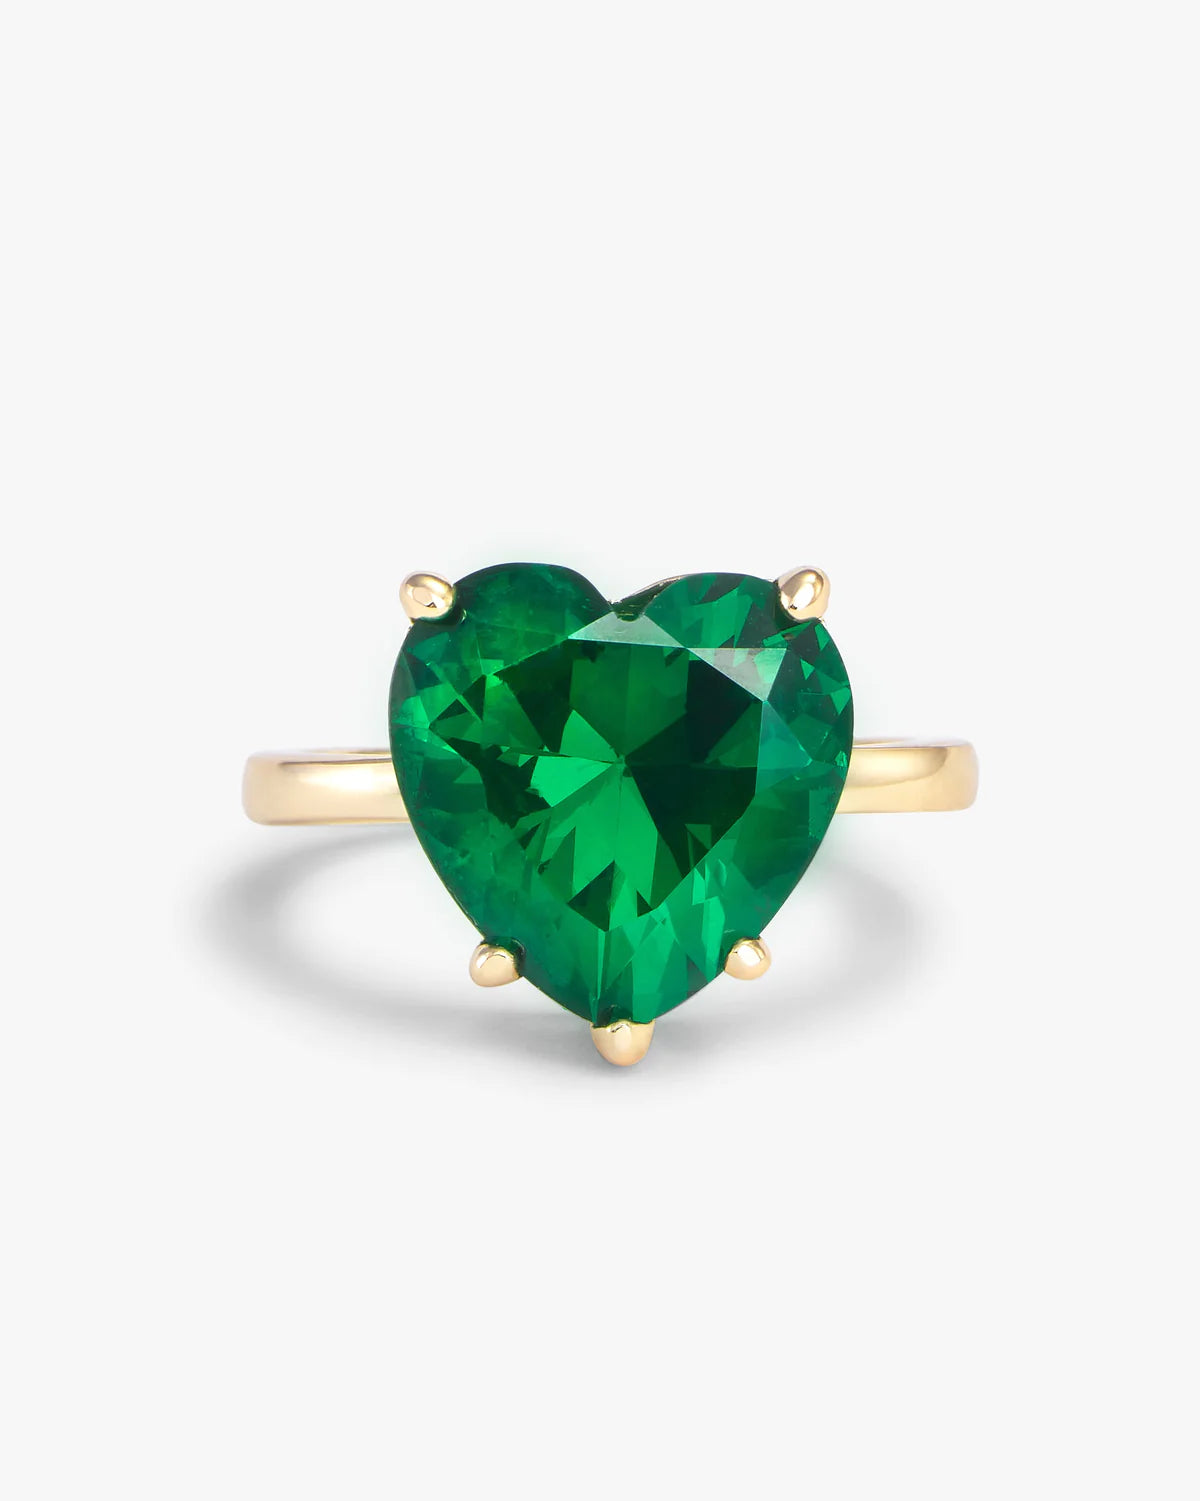 The Allison Emerald Heart Ring